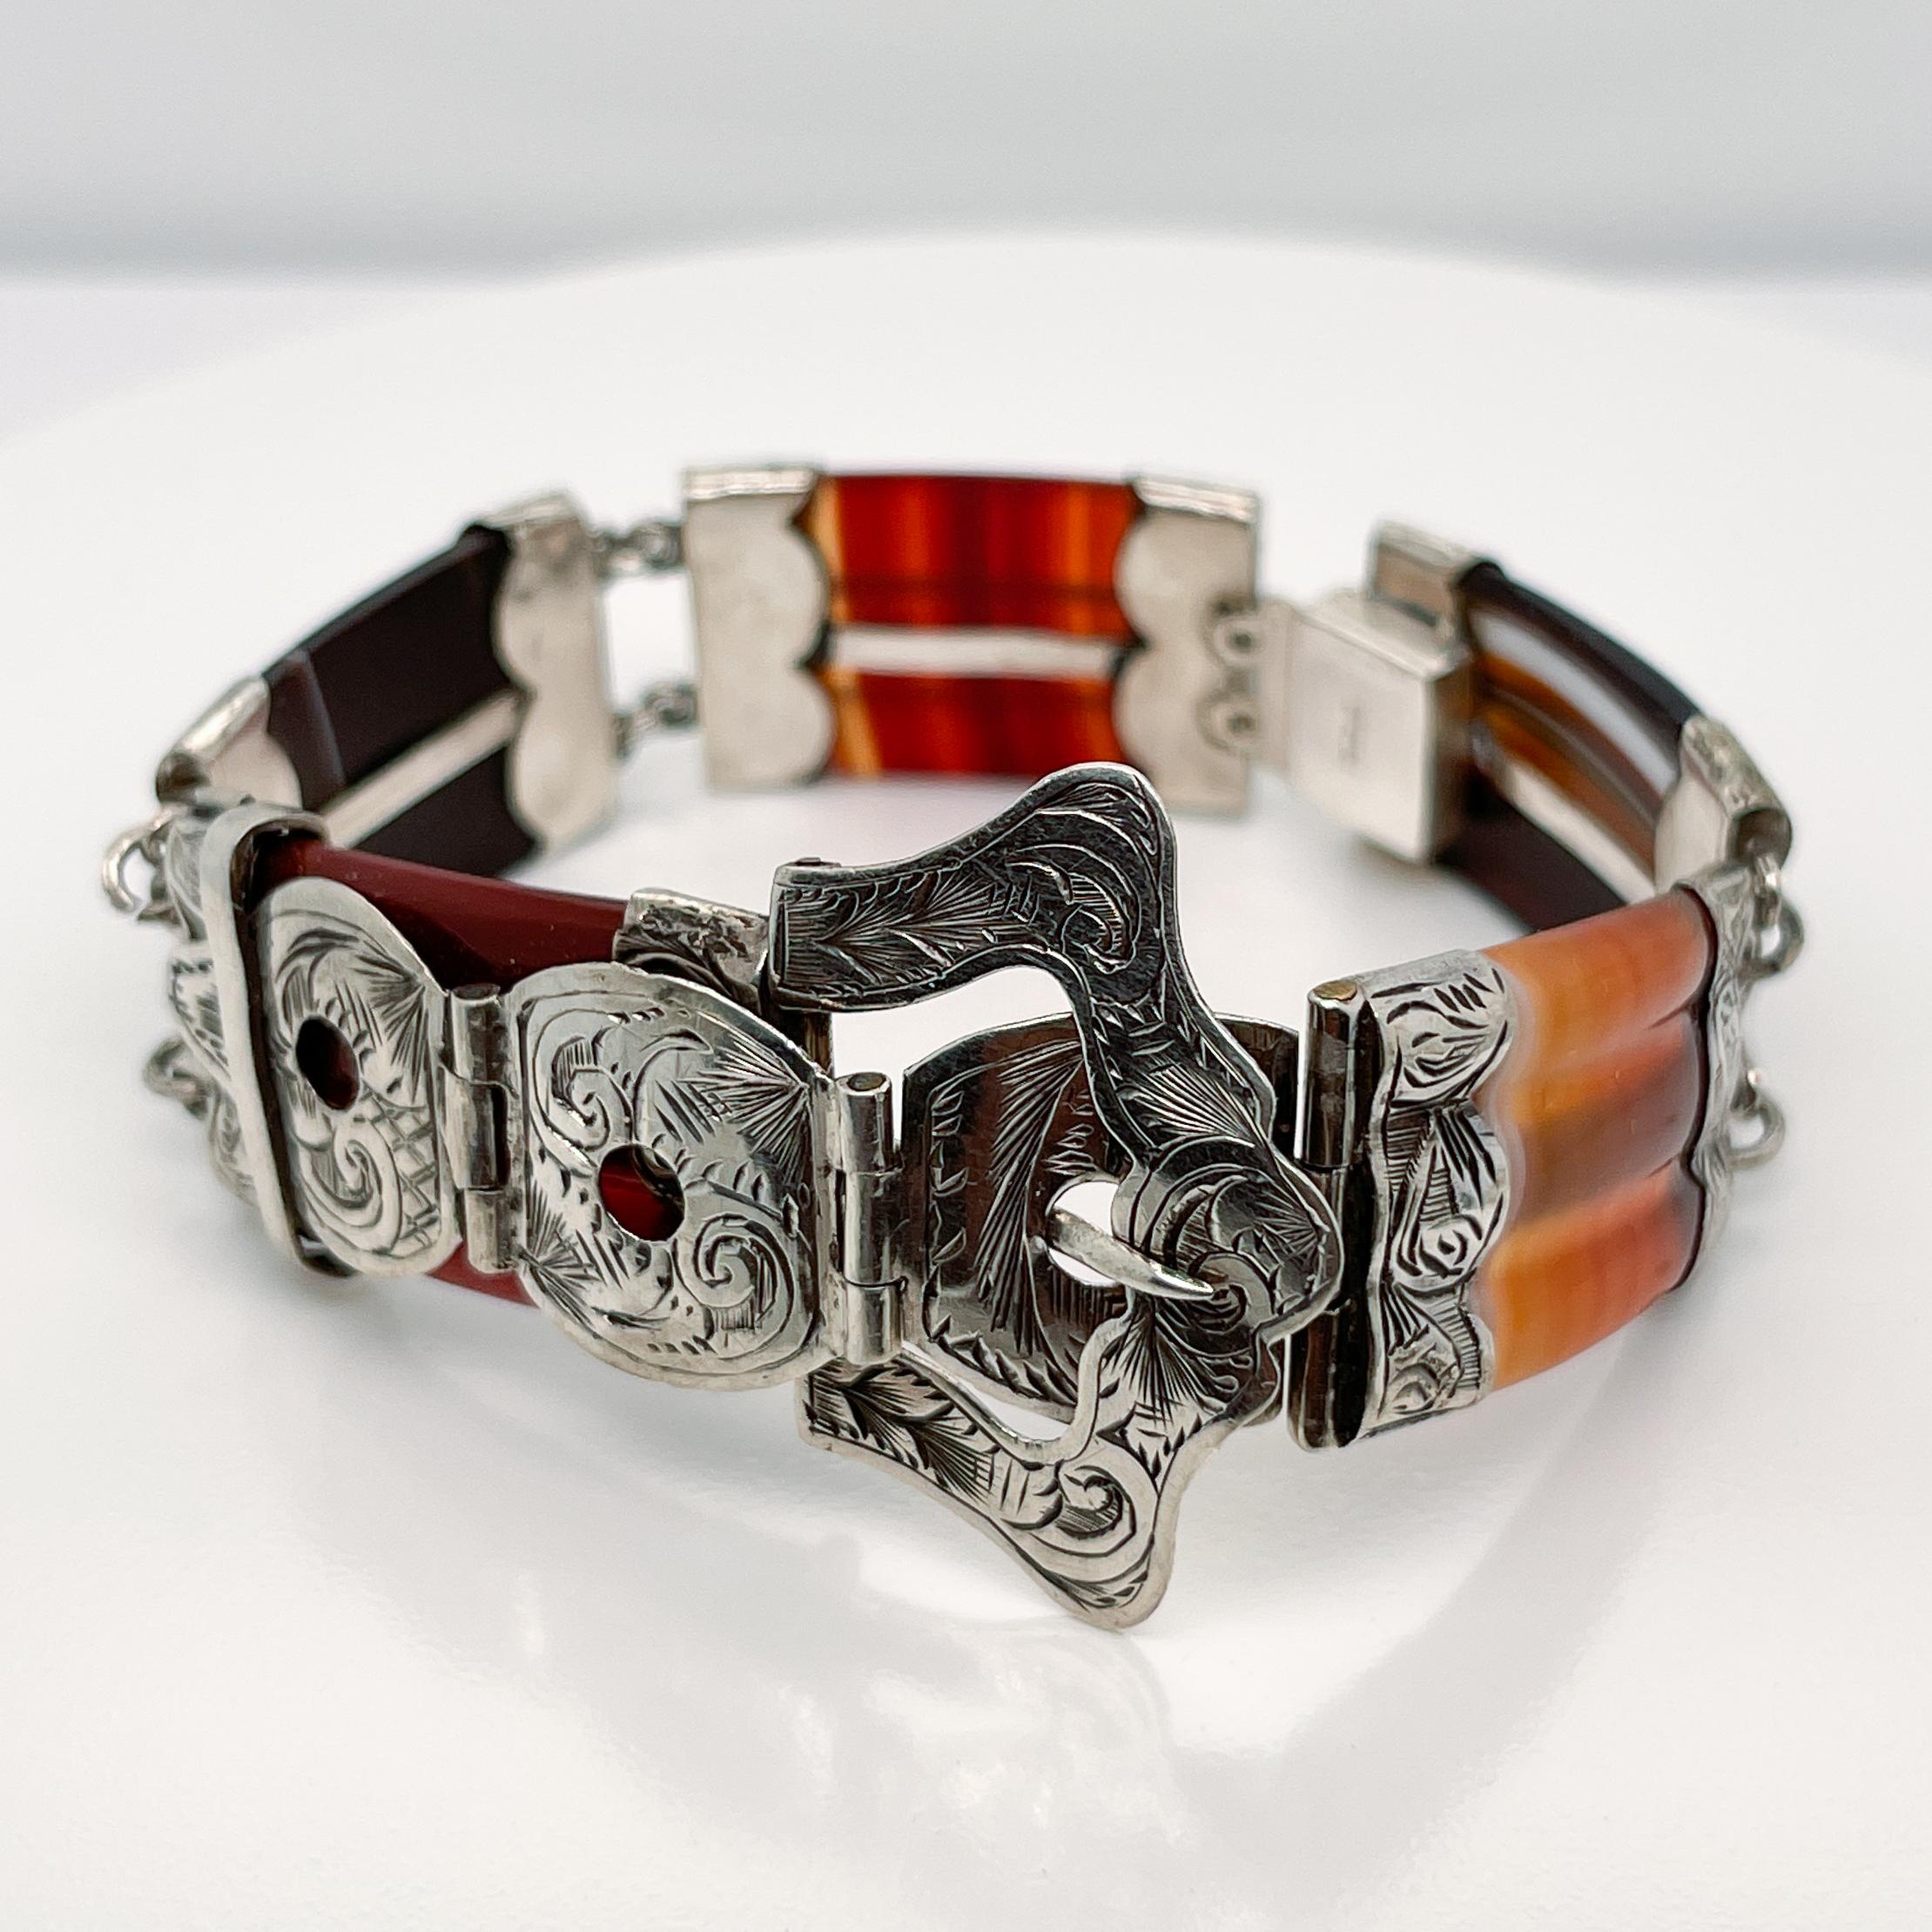 A fine vintage Scottish agate bracelet.

In the Victorian style.

With engraved decorative sterling silver findings capping the ends of 5 multi-colored brown and orange agates. 

The center of the bracelet has an engraved silver buckle.

Simply a